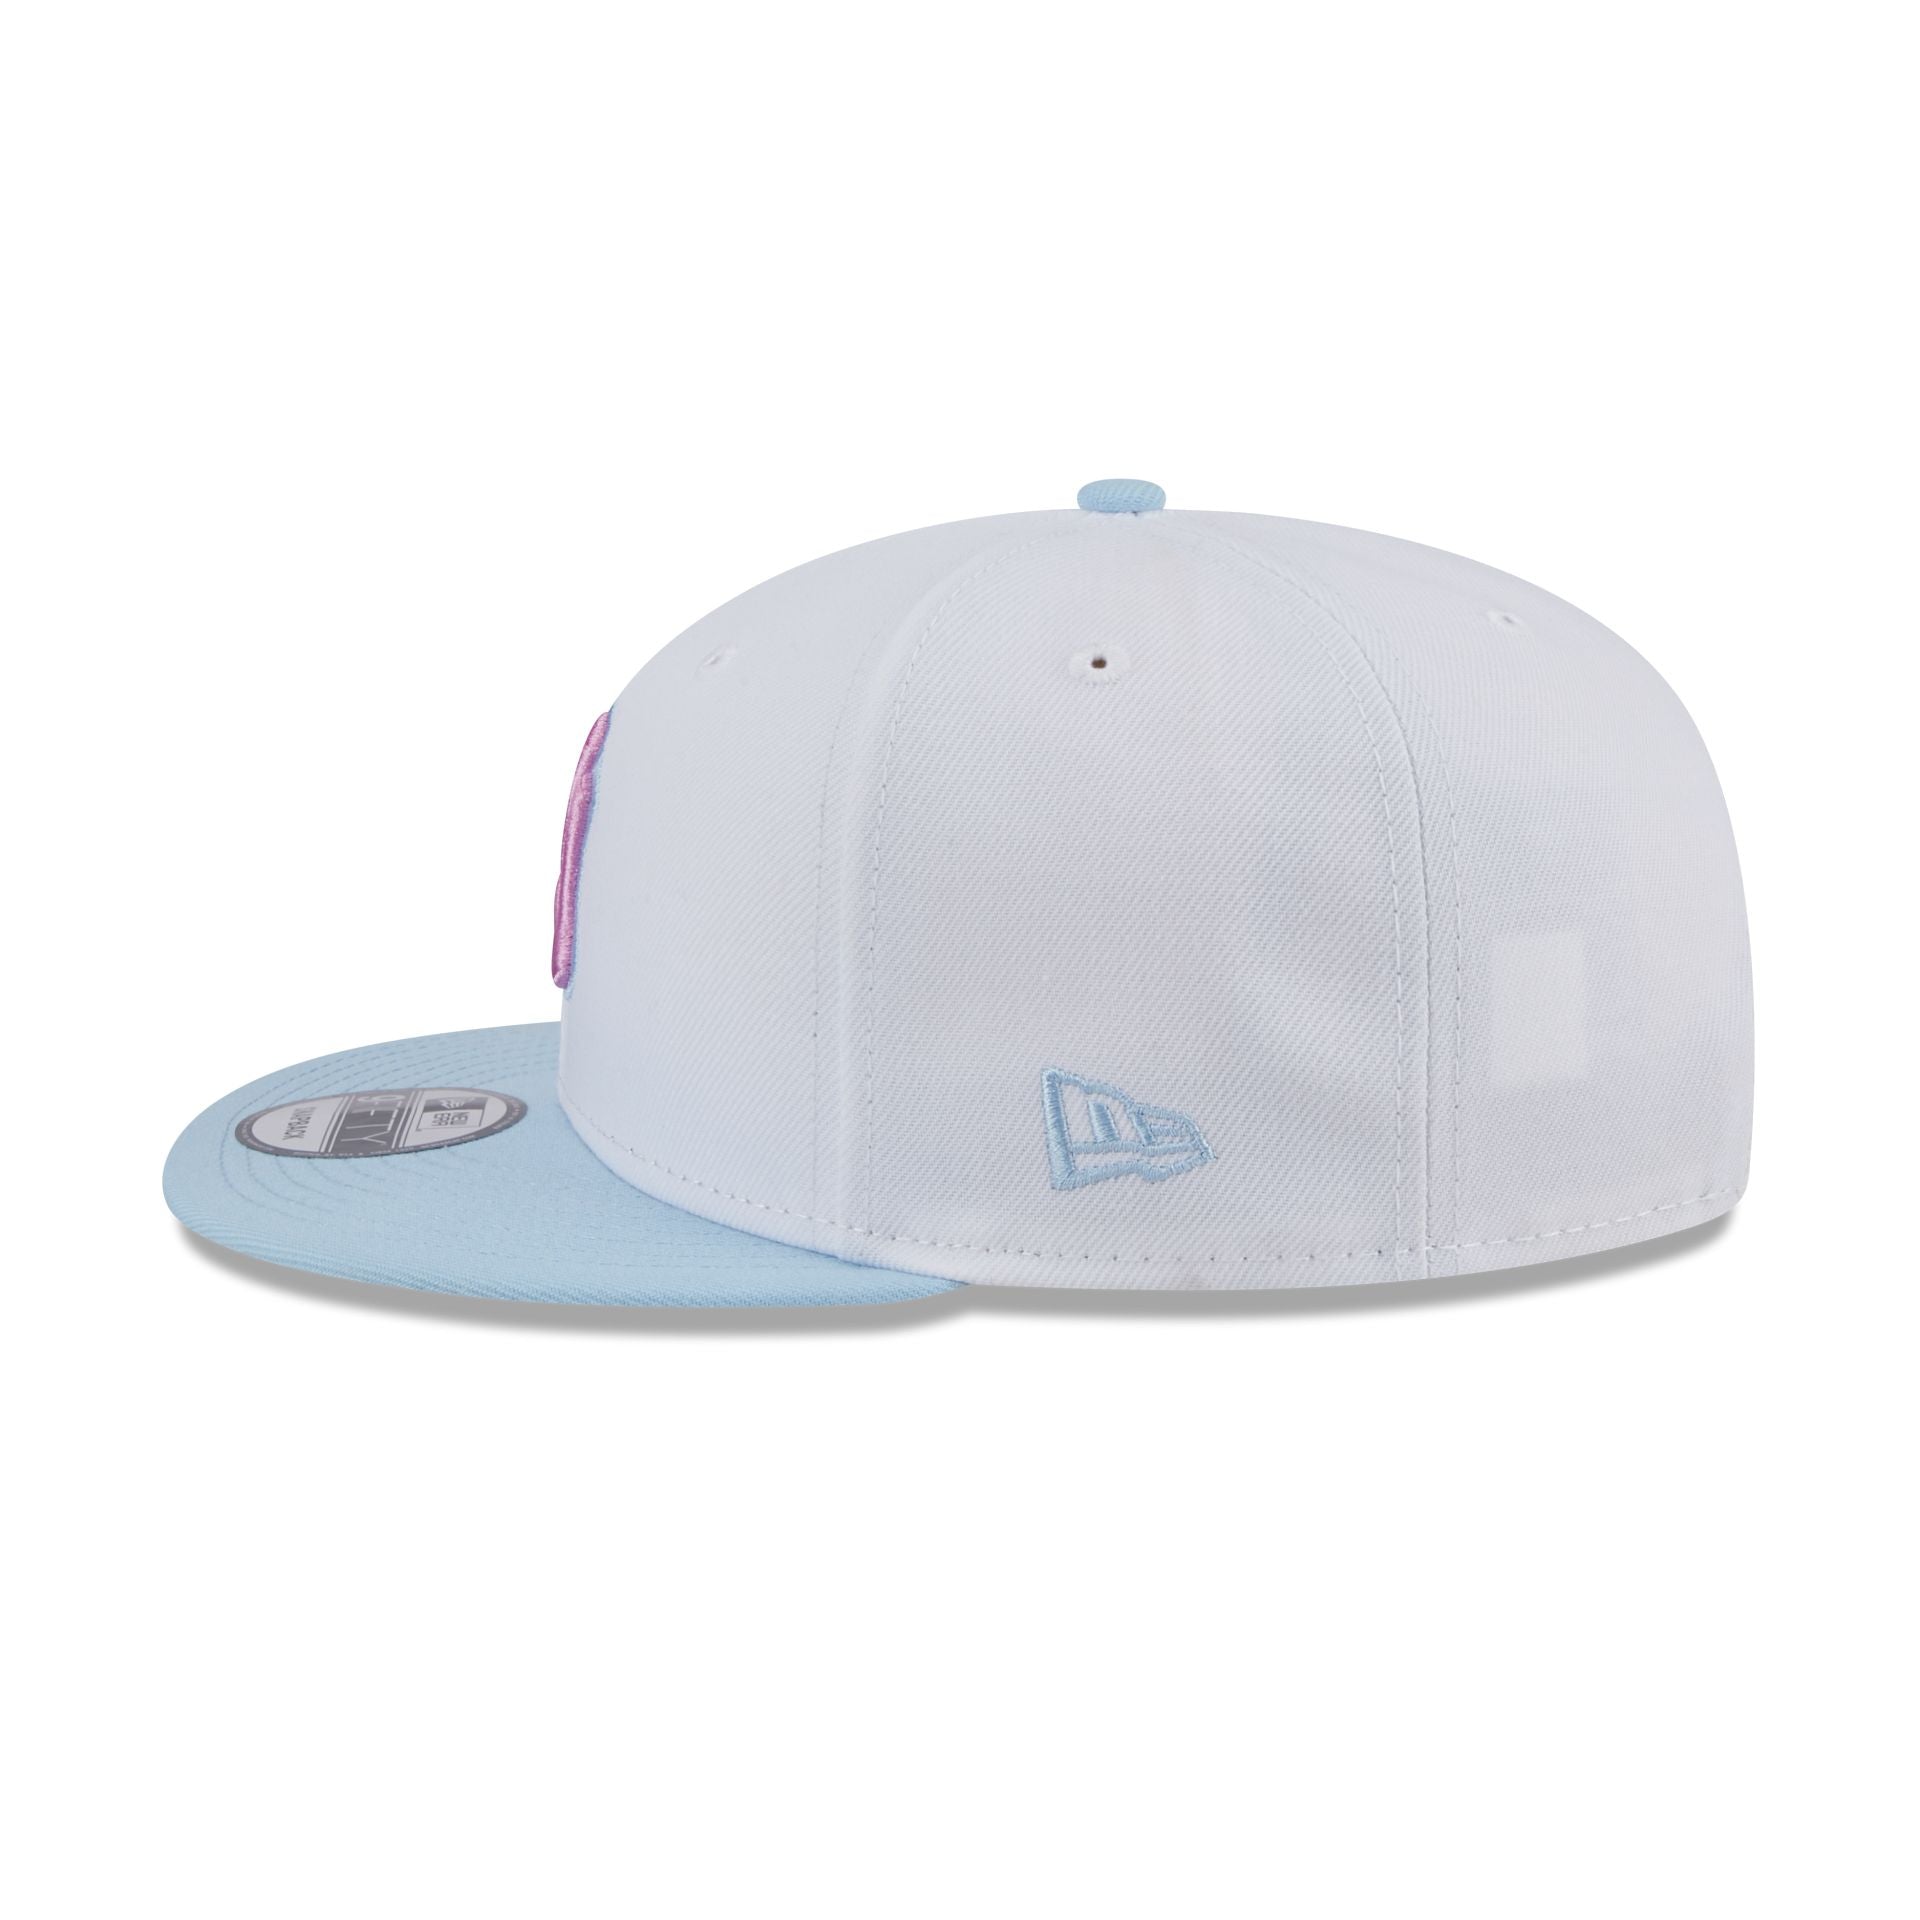 New York Yankees Color Pack White 9FIFTY Snapback Hat – New Era Cap